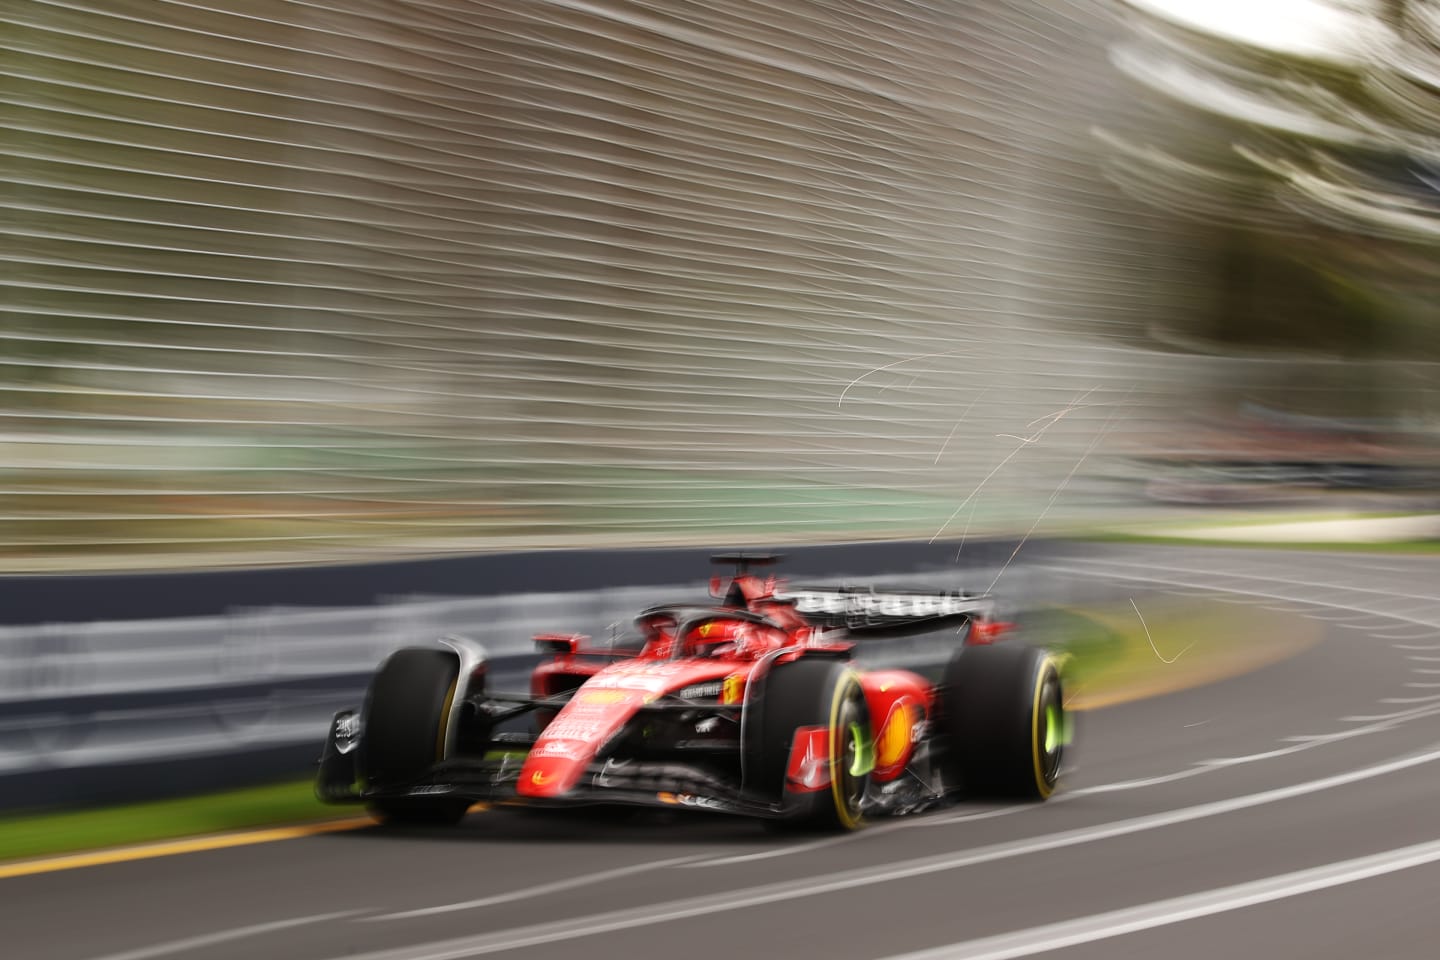 MELBOURNE, AUSTRALIA - MARCH 31: Charles Leclerc of Monaco driving the (16) Ferrari SF-23 on track during practice ahead of the F1 Grand Prix of Australia at Albert Park Grand Prix Circuit on March 31, 2023 in Melbourne, Australia. (Photo by Robert Cianflone/Getty Images)